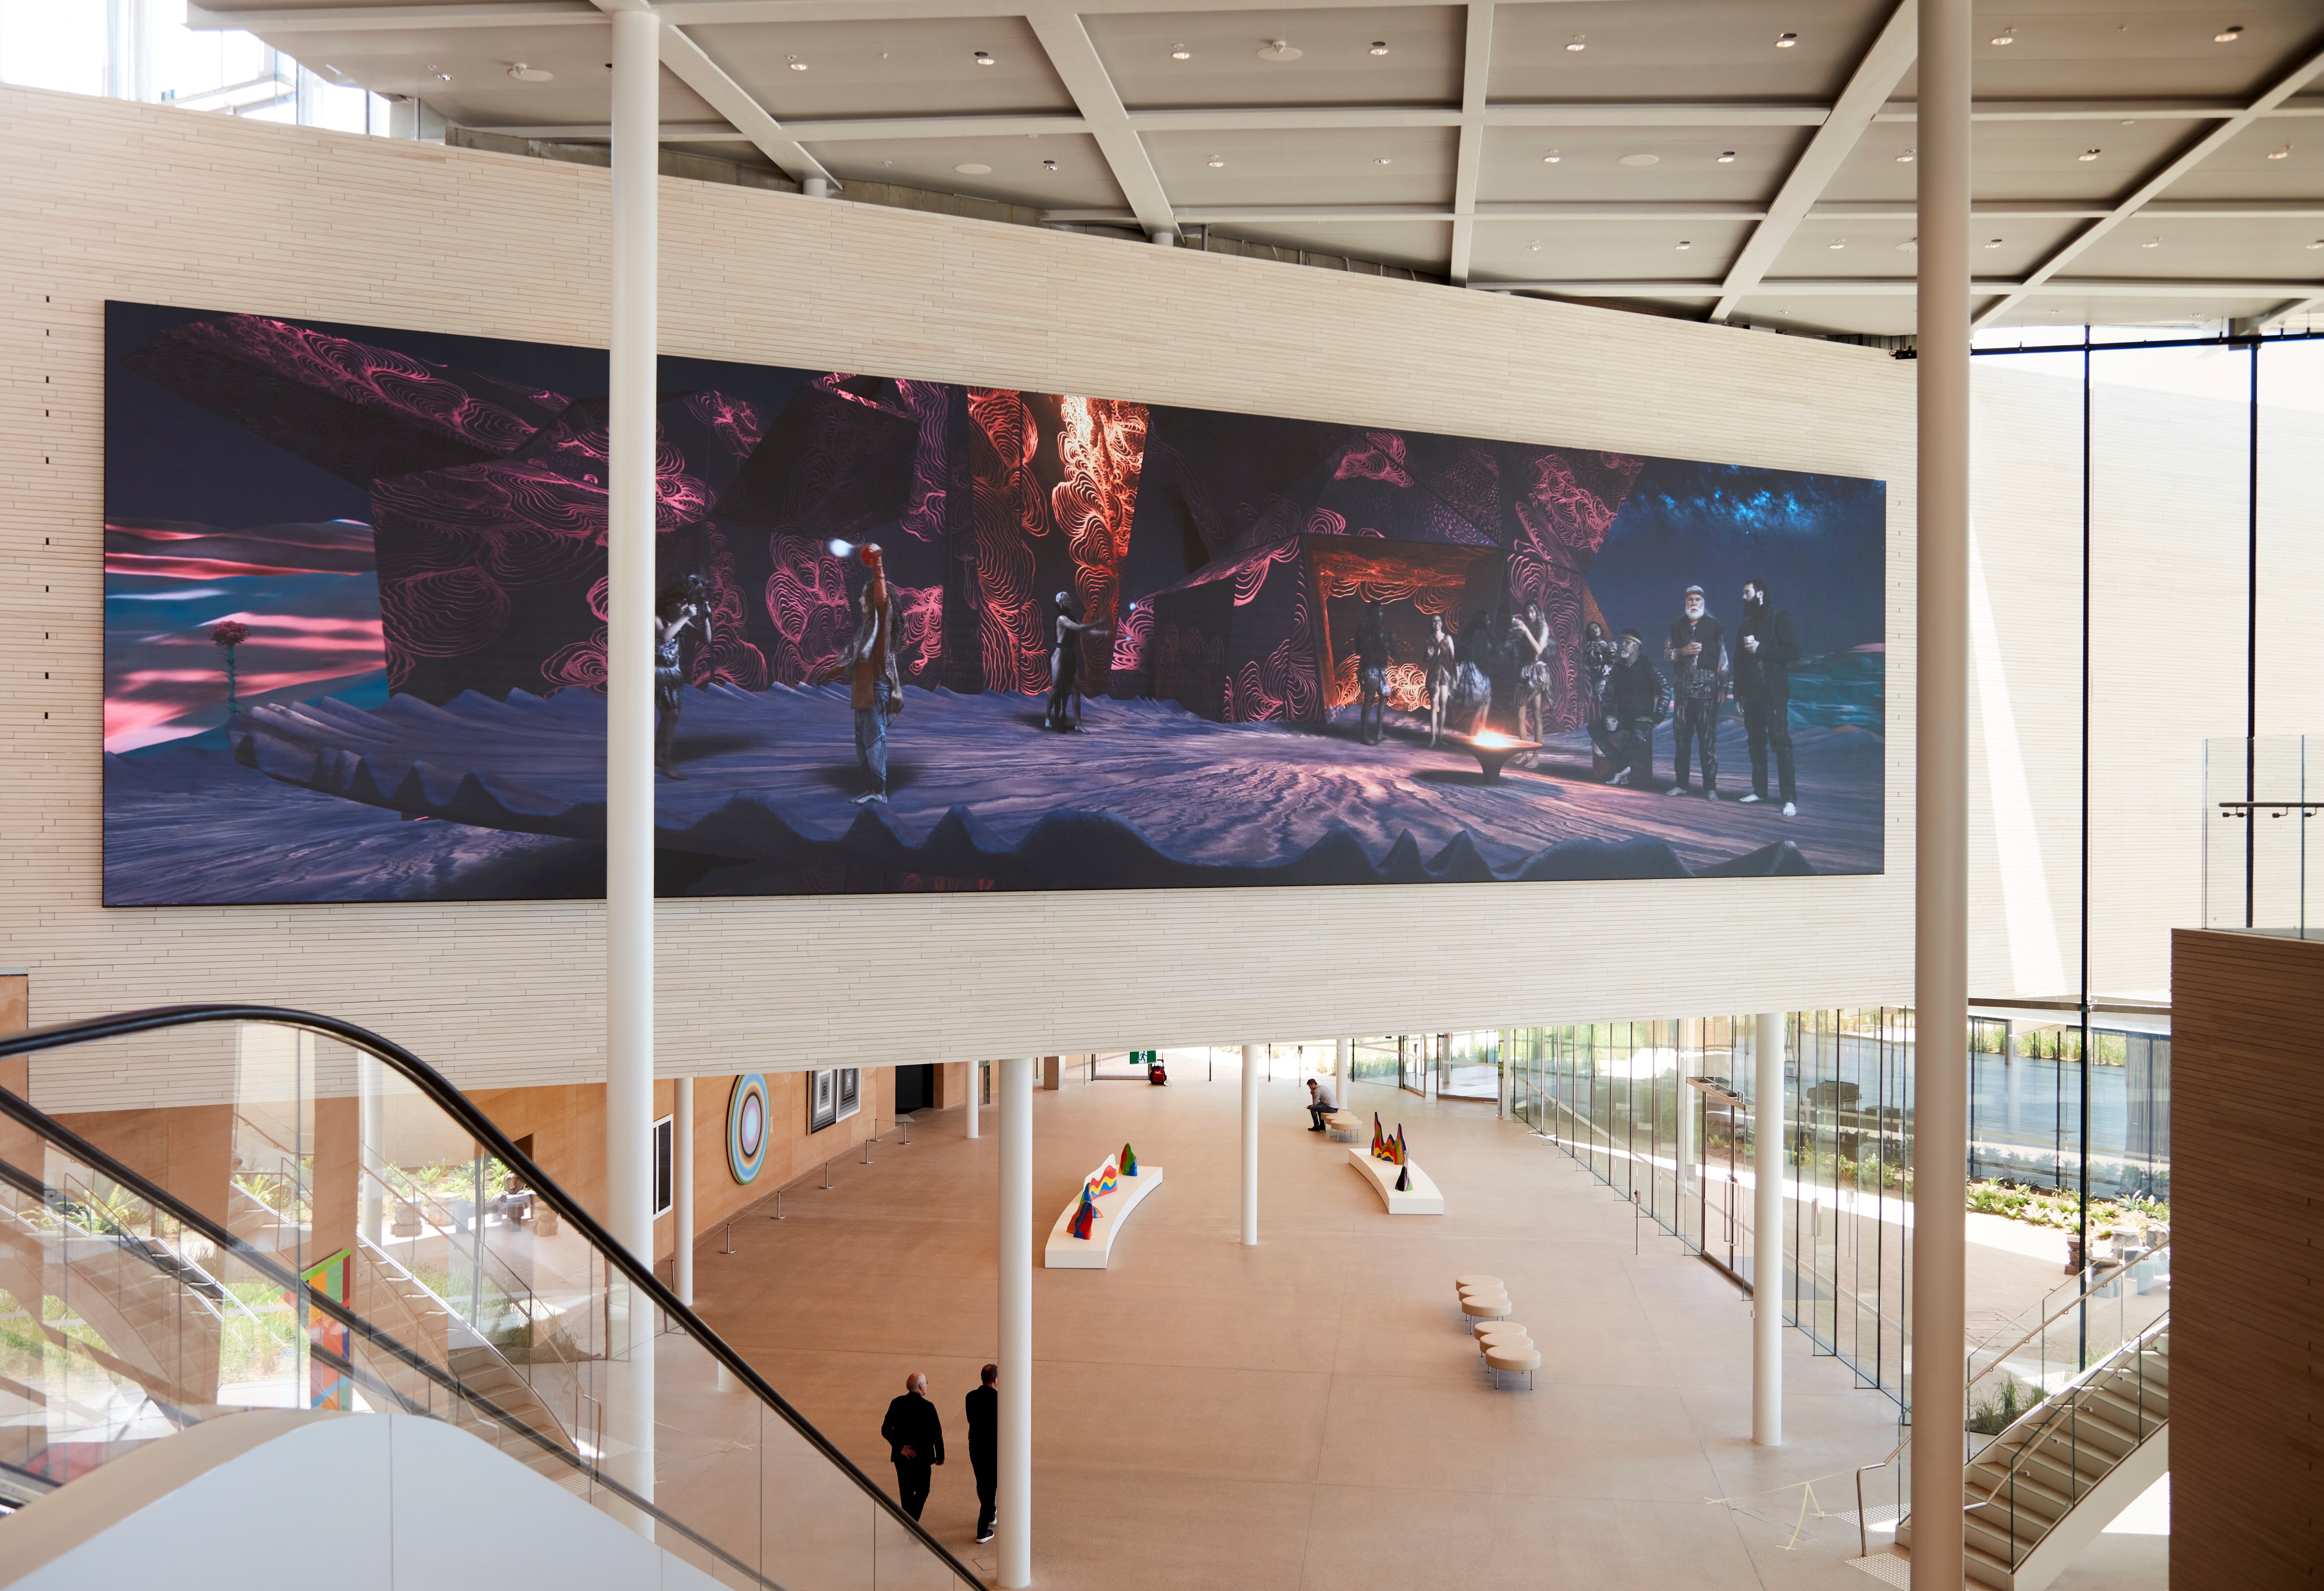 A large rectangular artwork spans several metres of a gallery wall, featuring a nighttime scene in vivid pinks and purples.